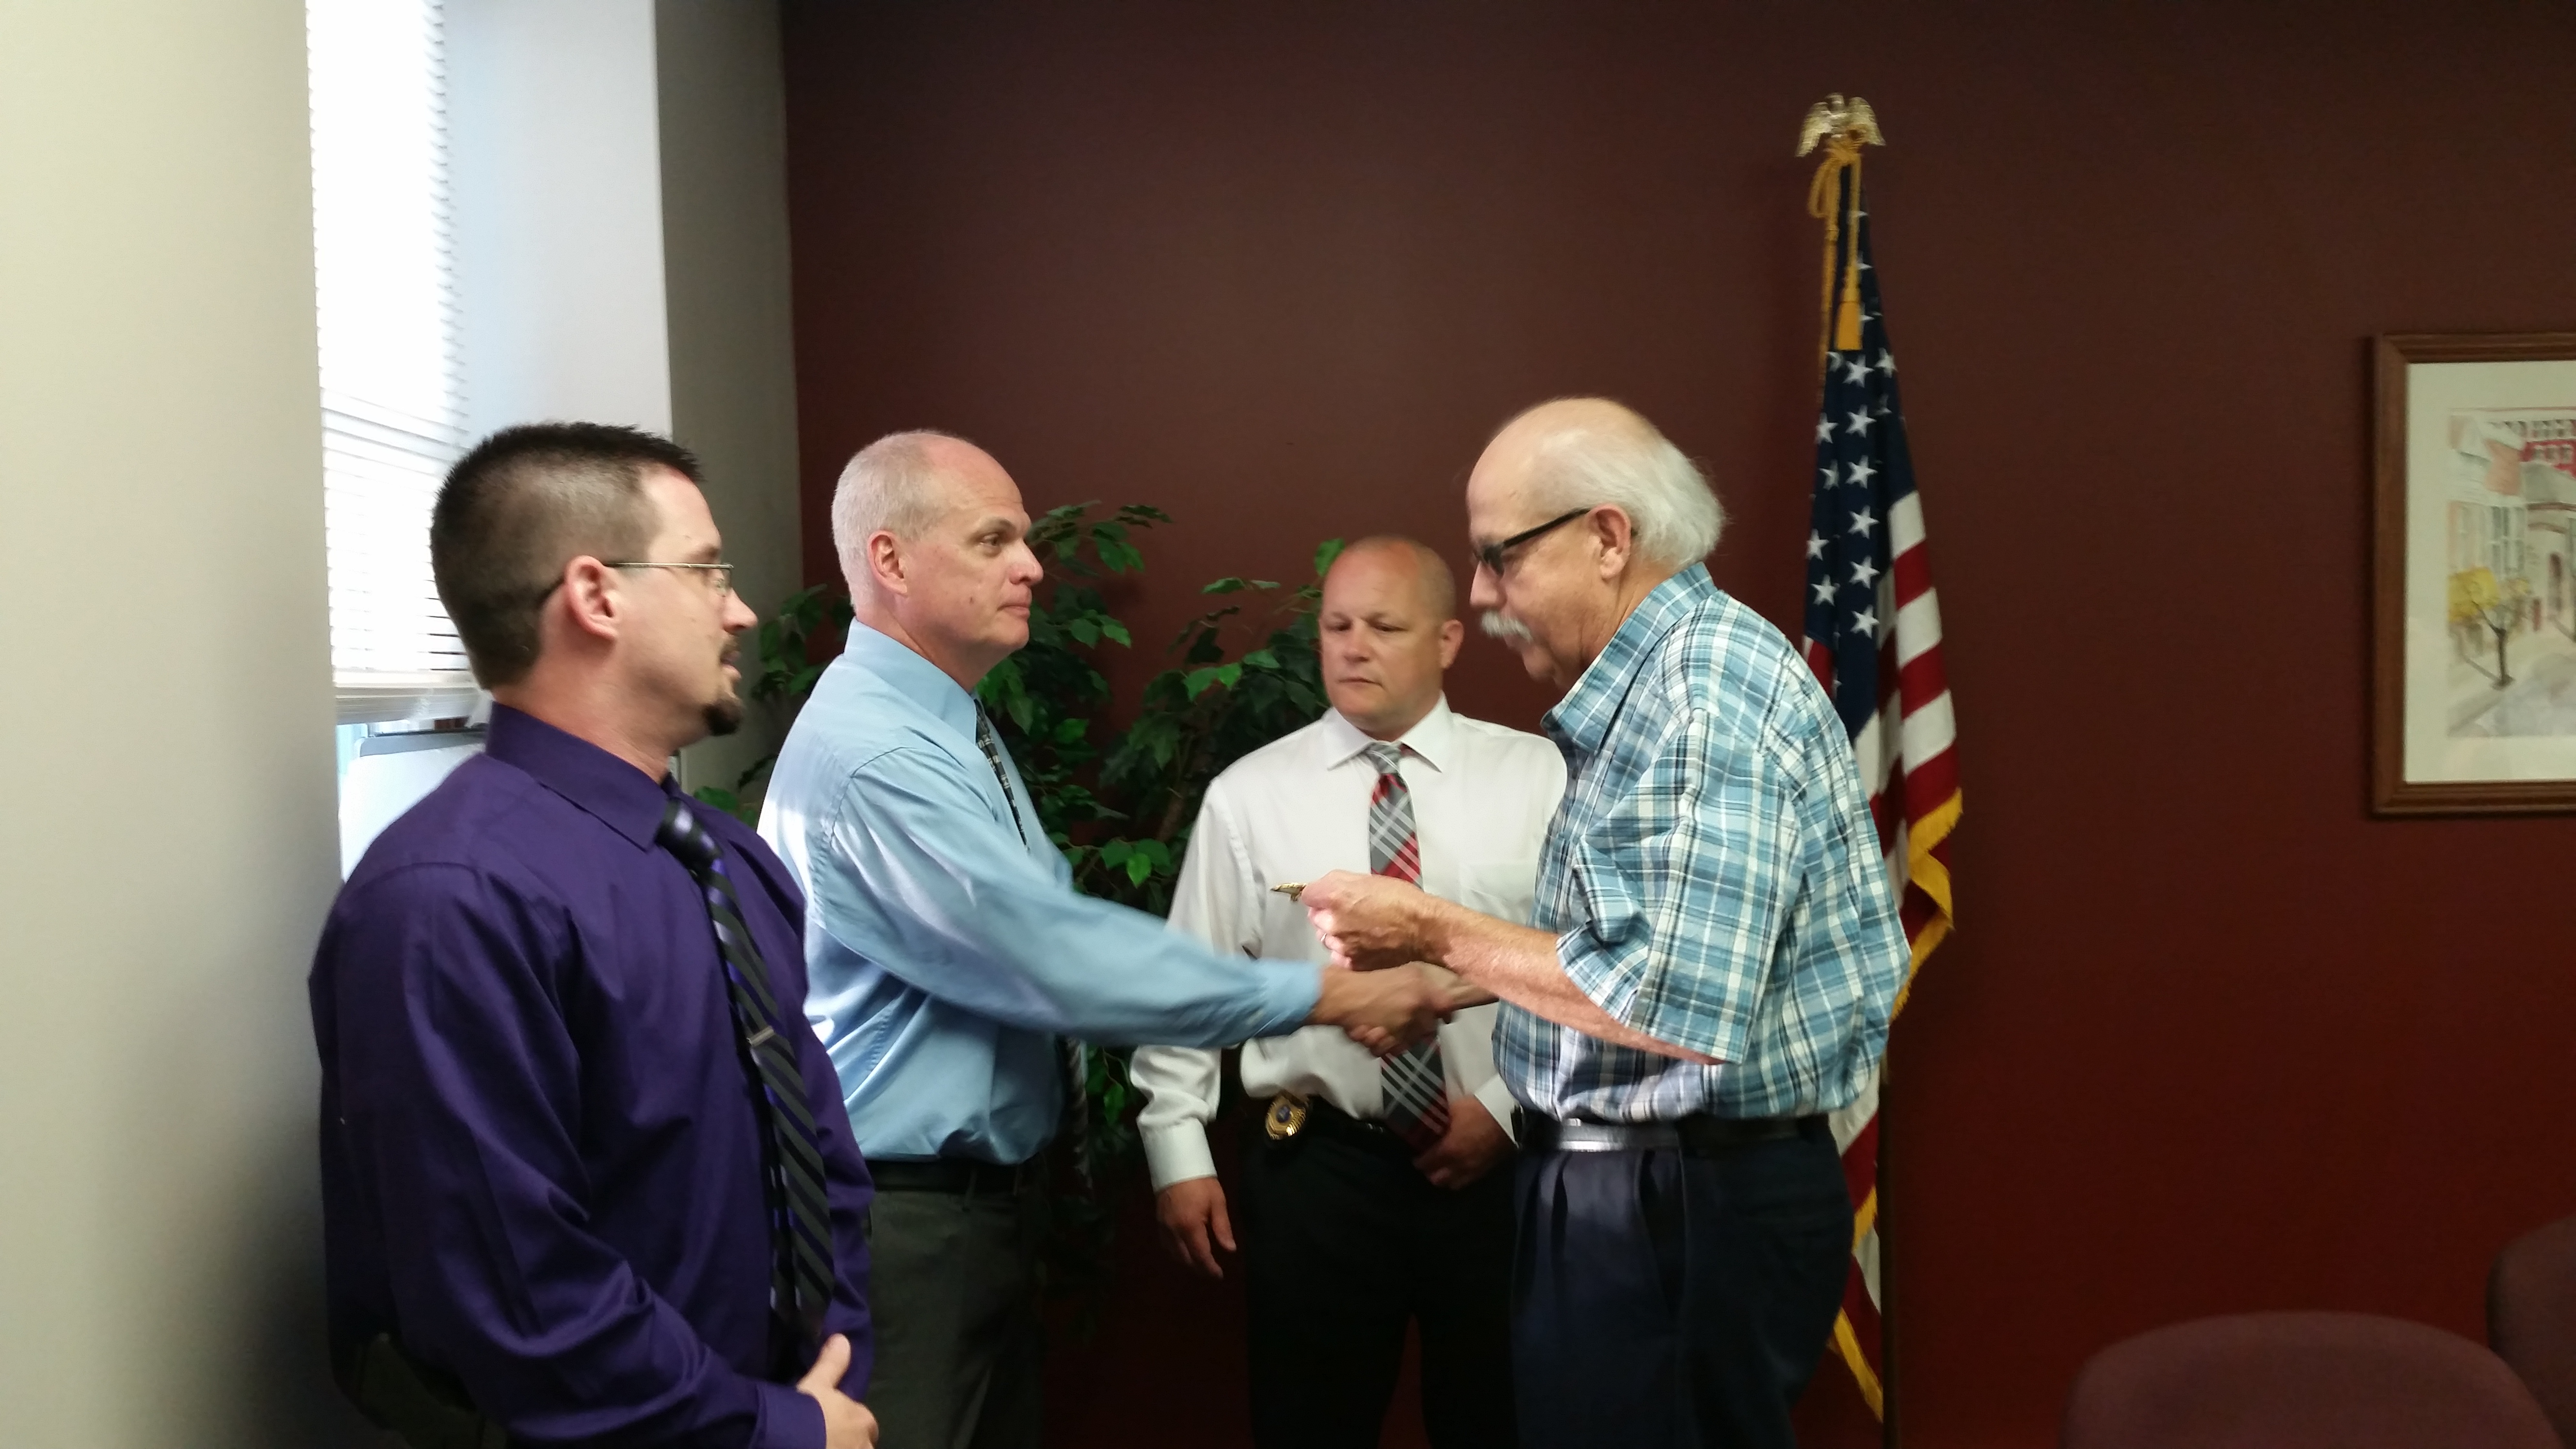 Clearfield Borough Mayor Jim Schell, (right), and Police Chief Vince McGinnis (right center) presented  badges to newly-appointed Assistant Police Chief Greg Neeper (left center), and newly-appointed Police Sergeant Nathan Curry (left) at Thursday's Clearfield Borough Council meeting. Neeper  and Curry will take their new positions April 22. (photo by Kimberly Finnigan)